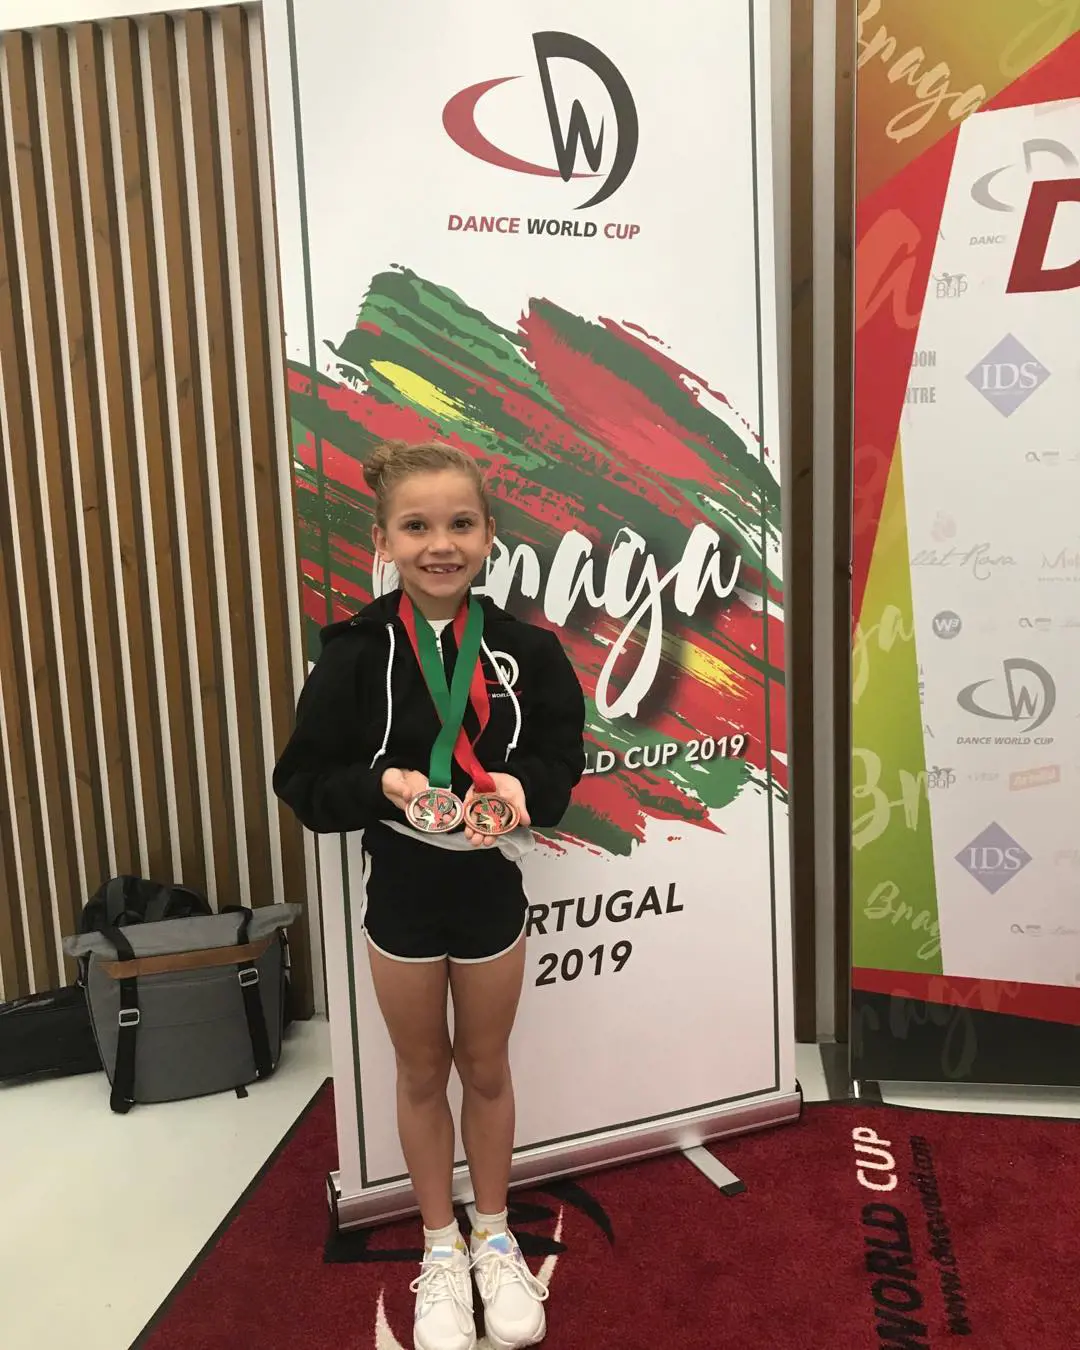 Amie Donald at the Dance World Cup in Portugal